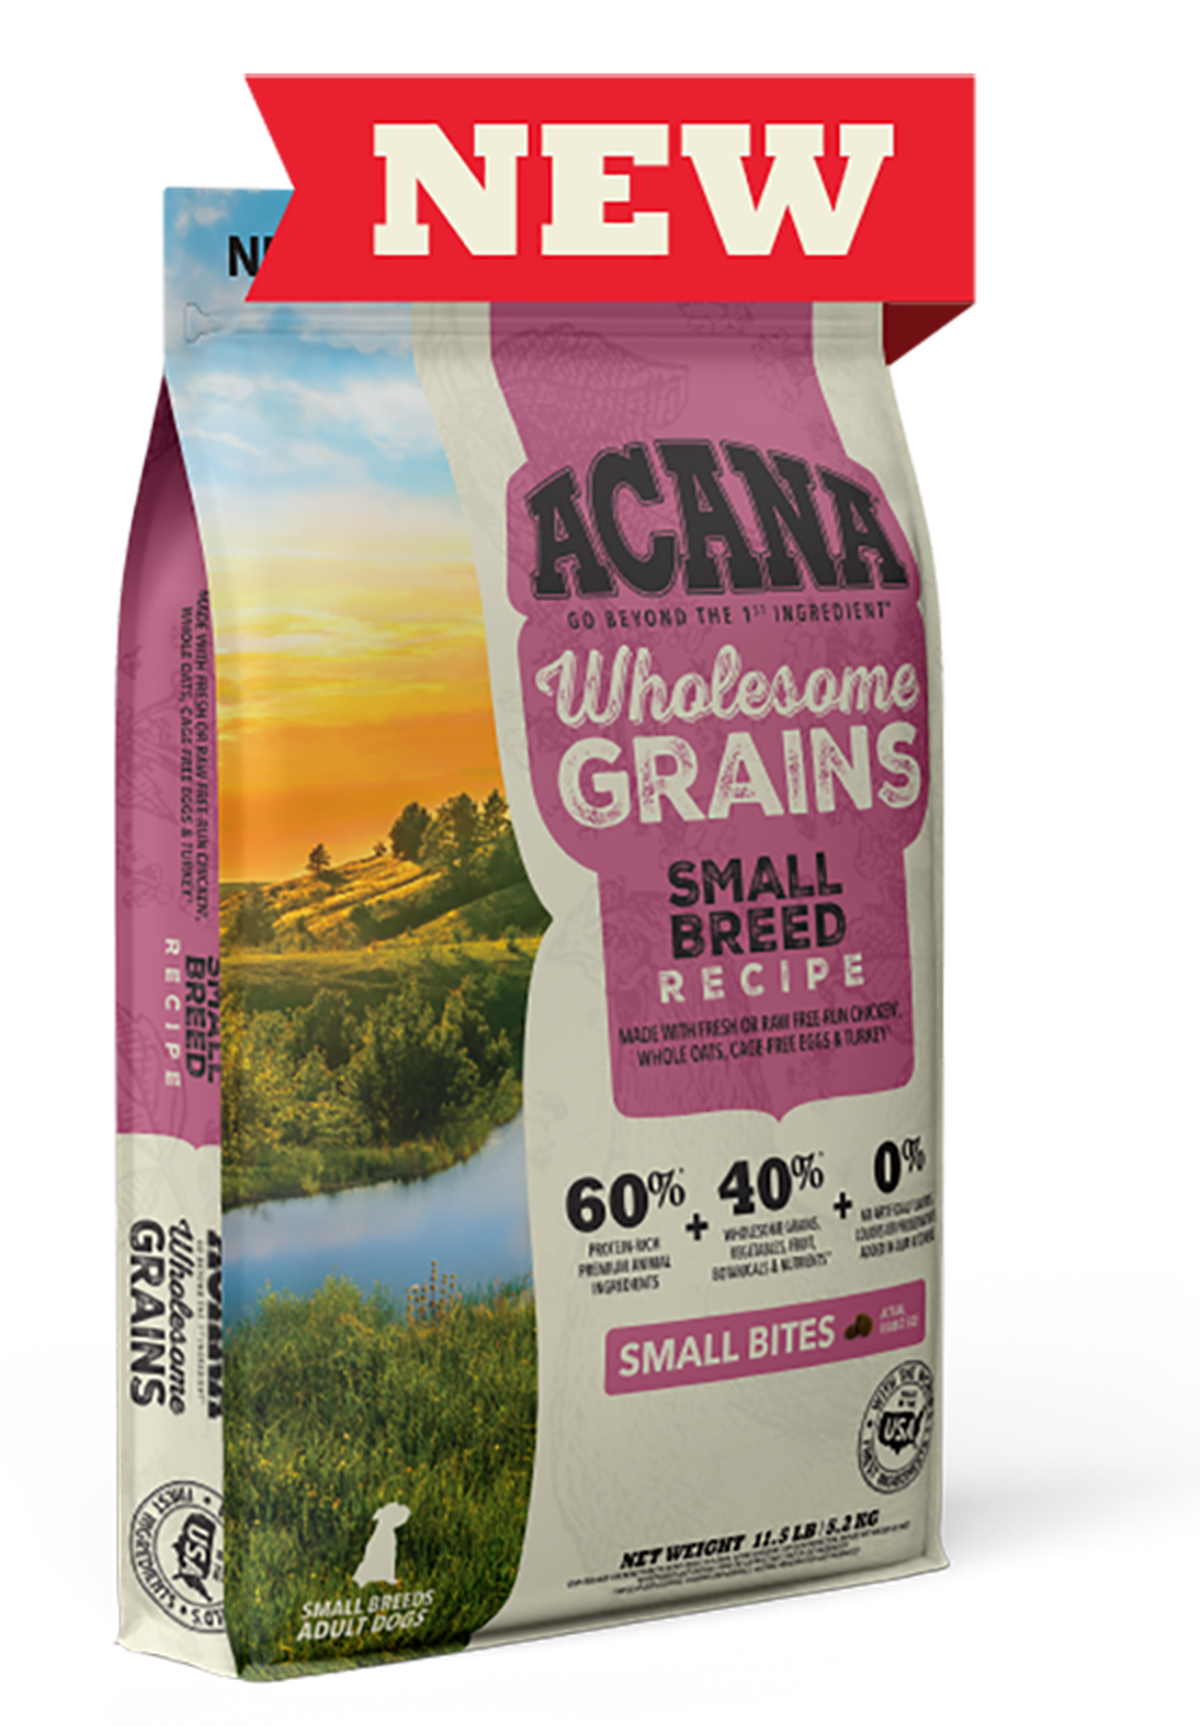 ACANA Wholesome Grains Small Breed Dry Dog Food